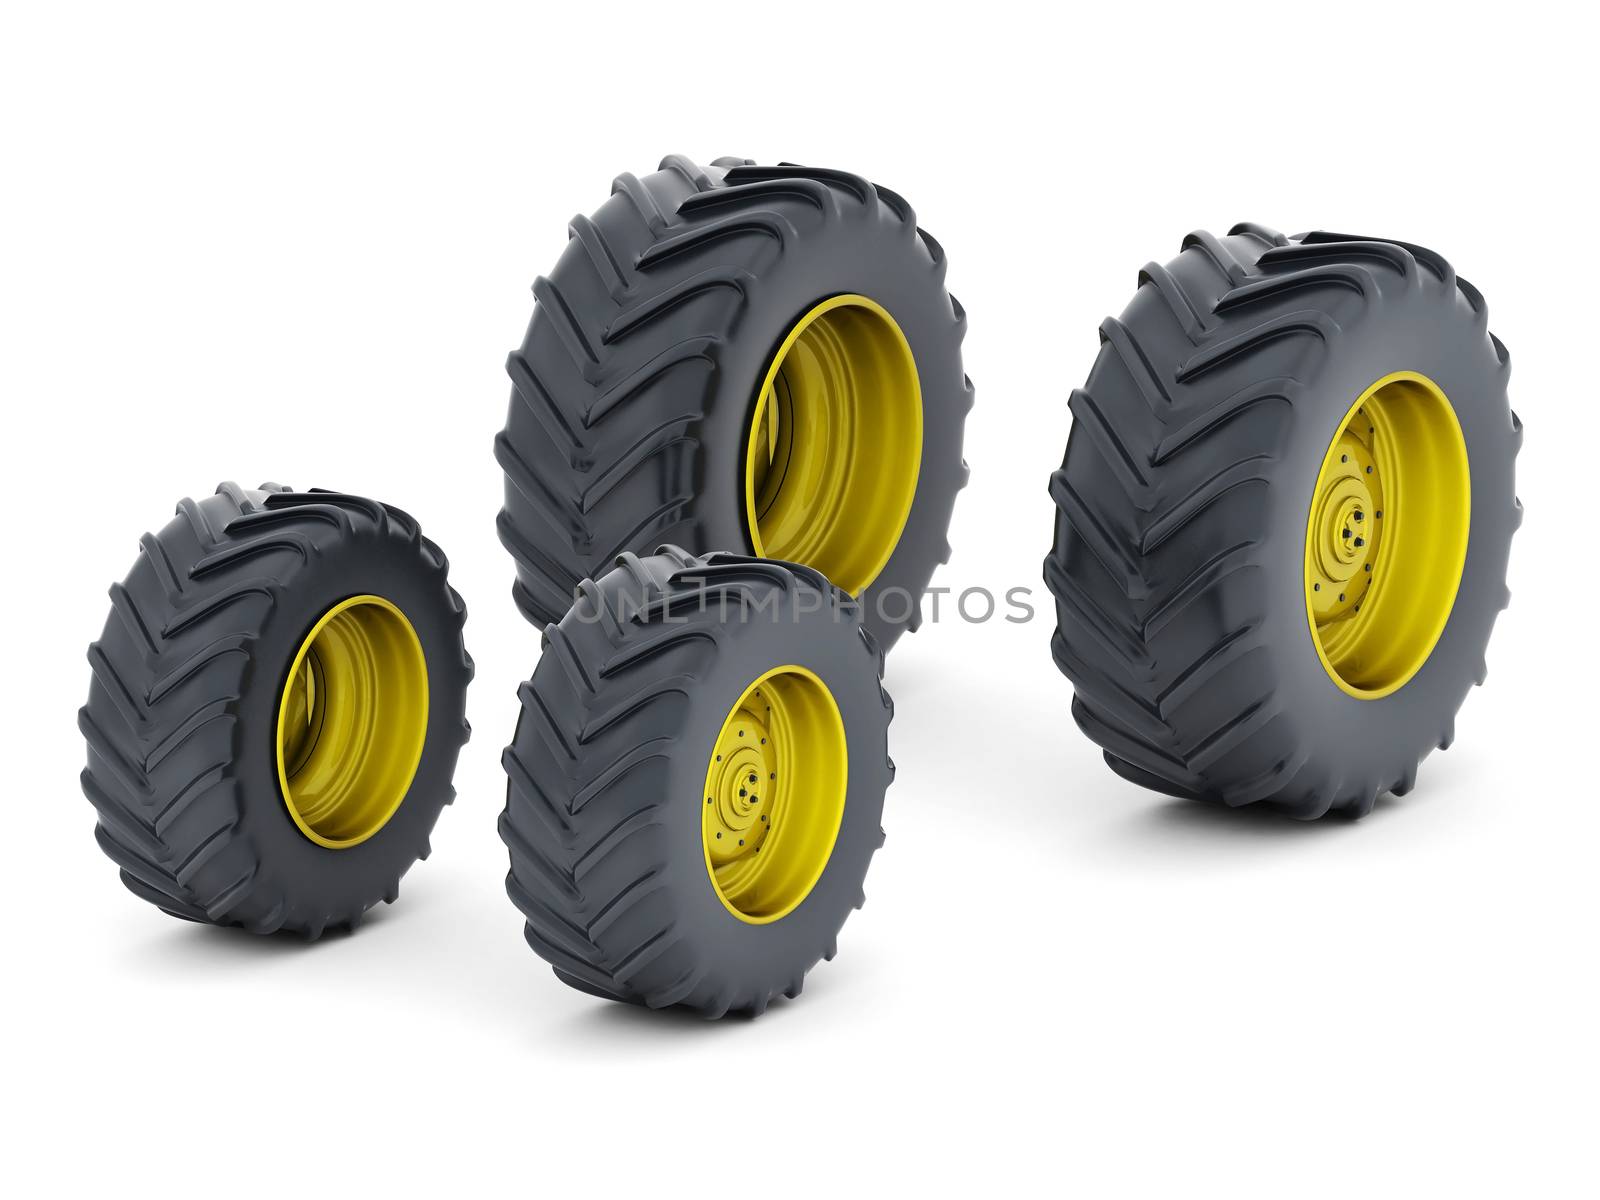 Tractor wheels isolated on white background